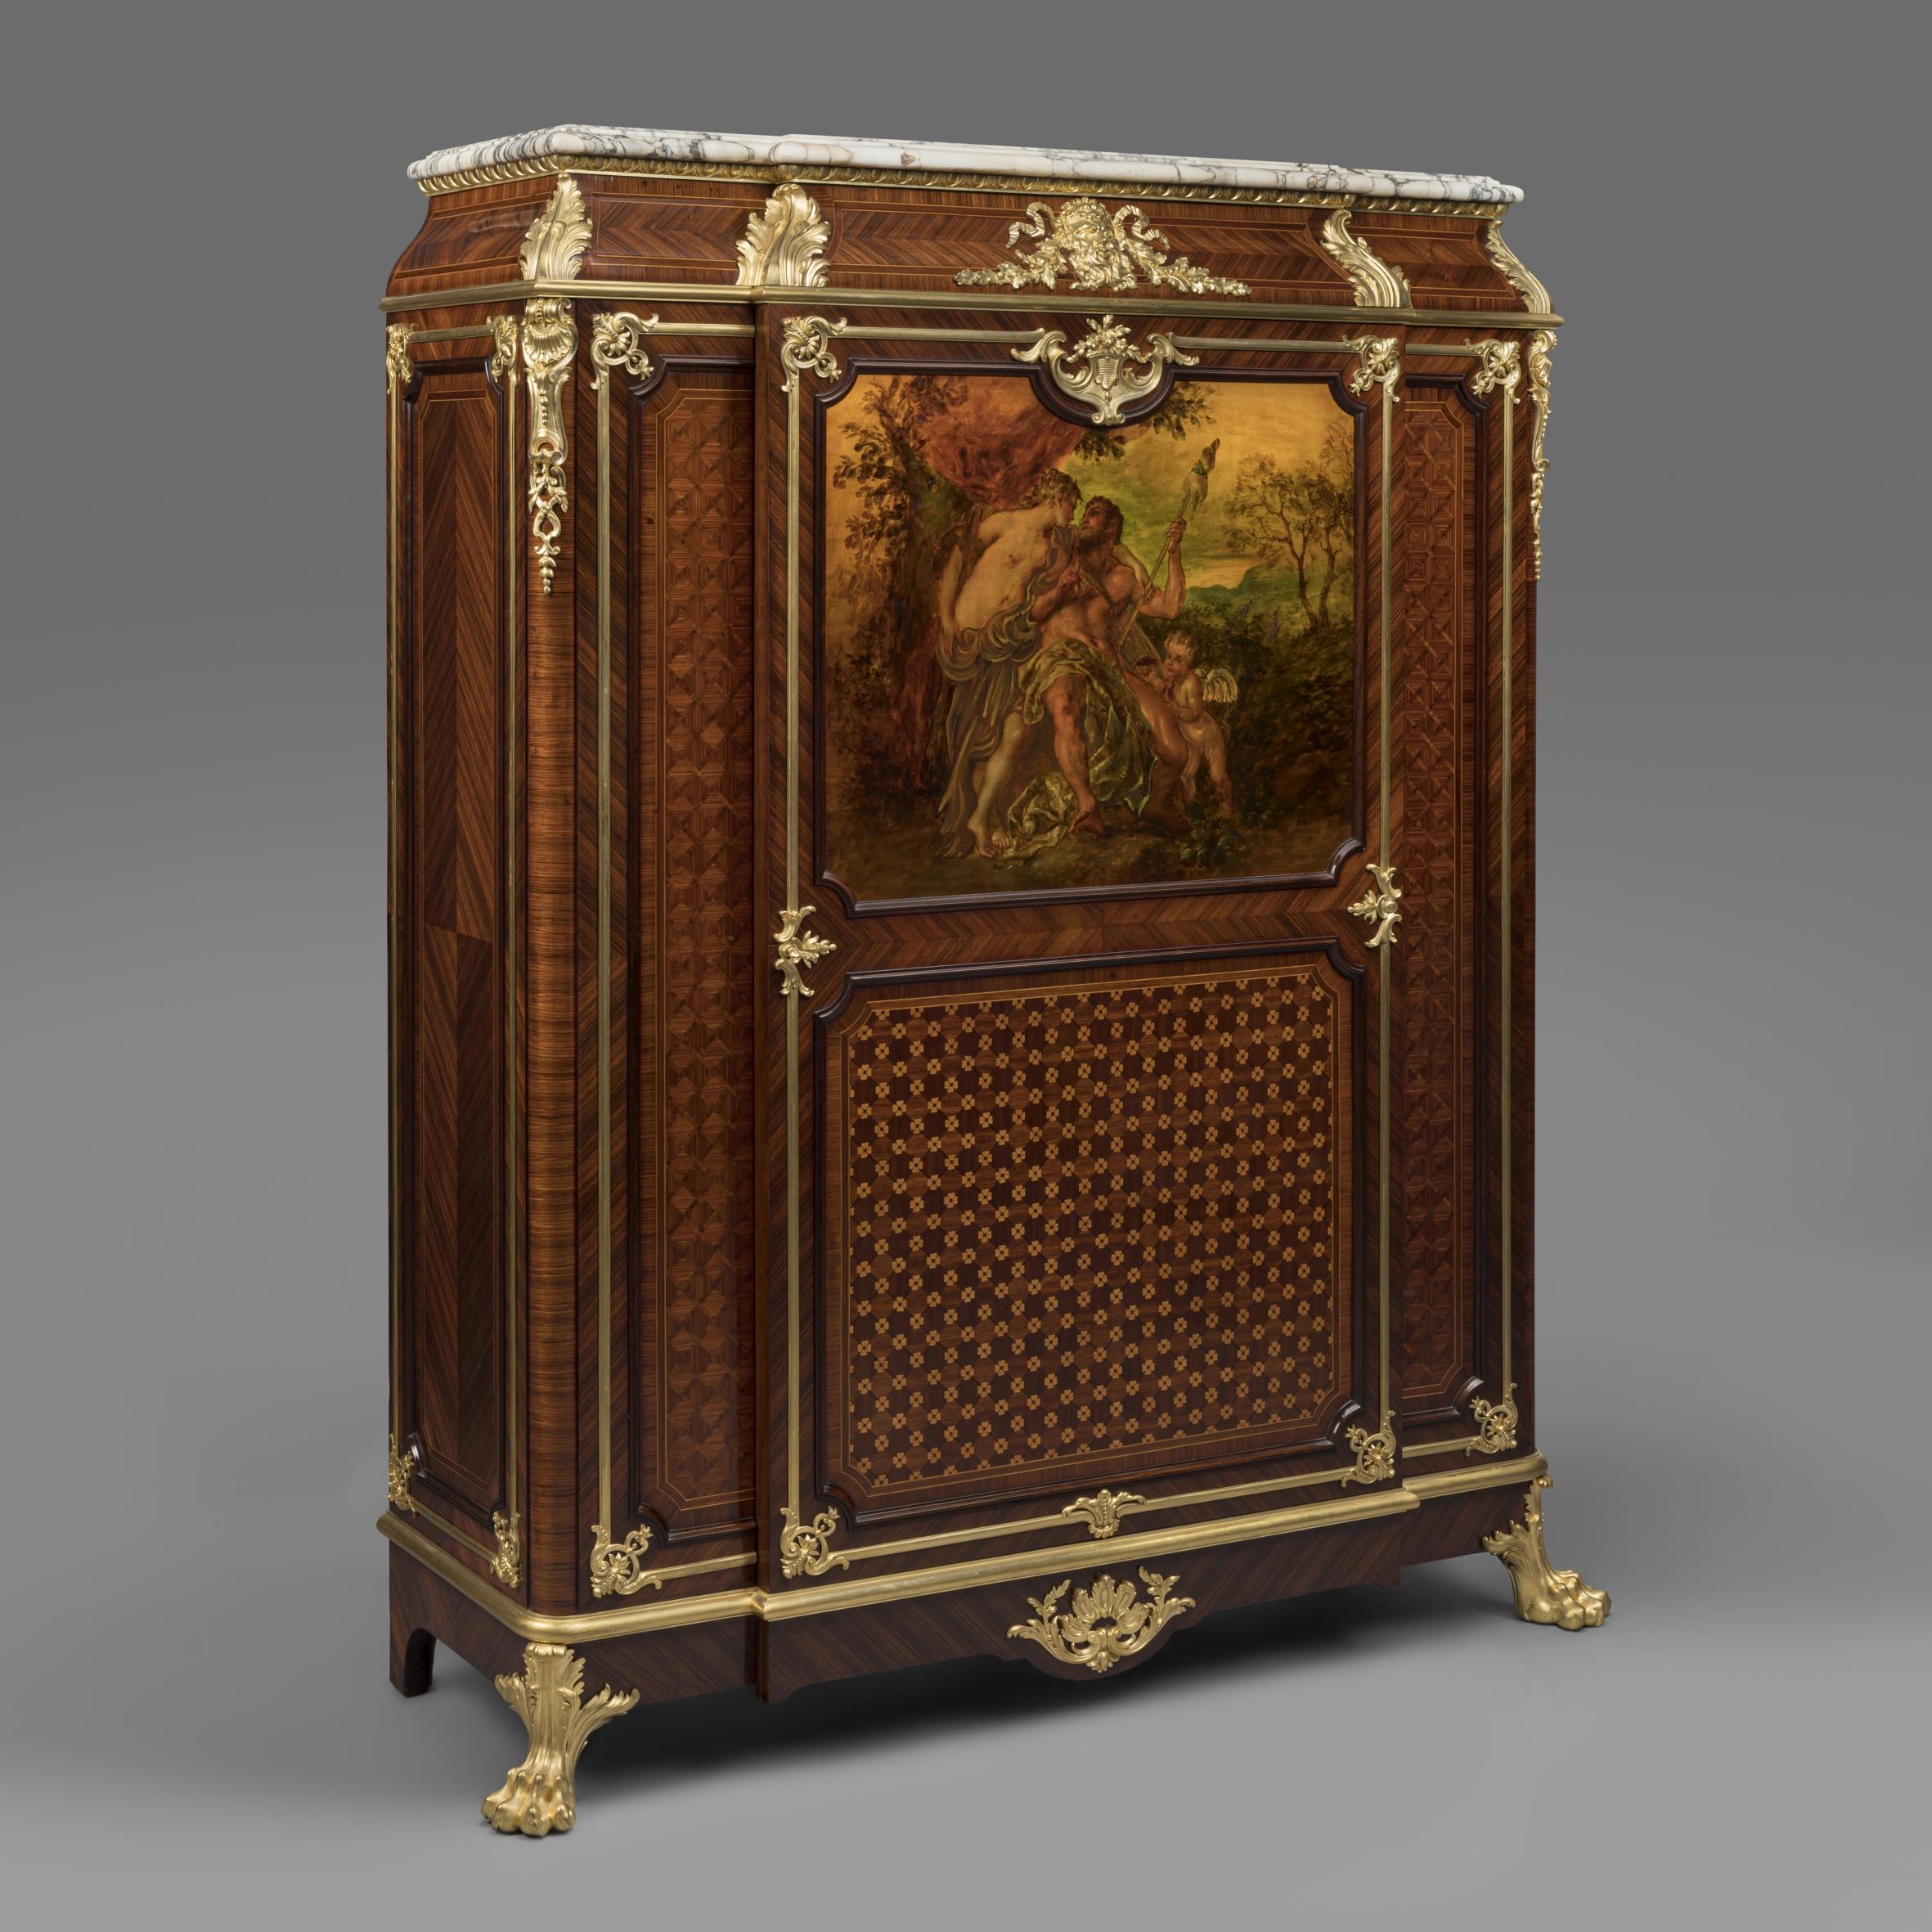 An exceptional and very rare Louis XV style gilt-bronze and Vernis Martin Mounted Parquetry side cabinet by Maison Krieger.

Stamped to the carcass ‘KRIEGER’ and stencilled to the back ‘KRIEGER 74 Faubourg St Antoine Paris’. The lock plate signed